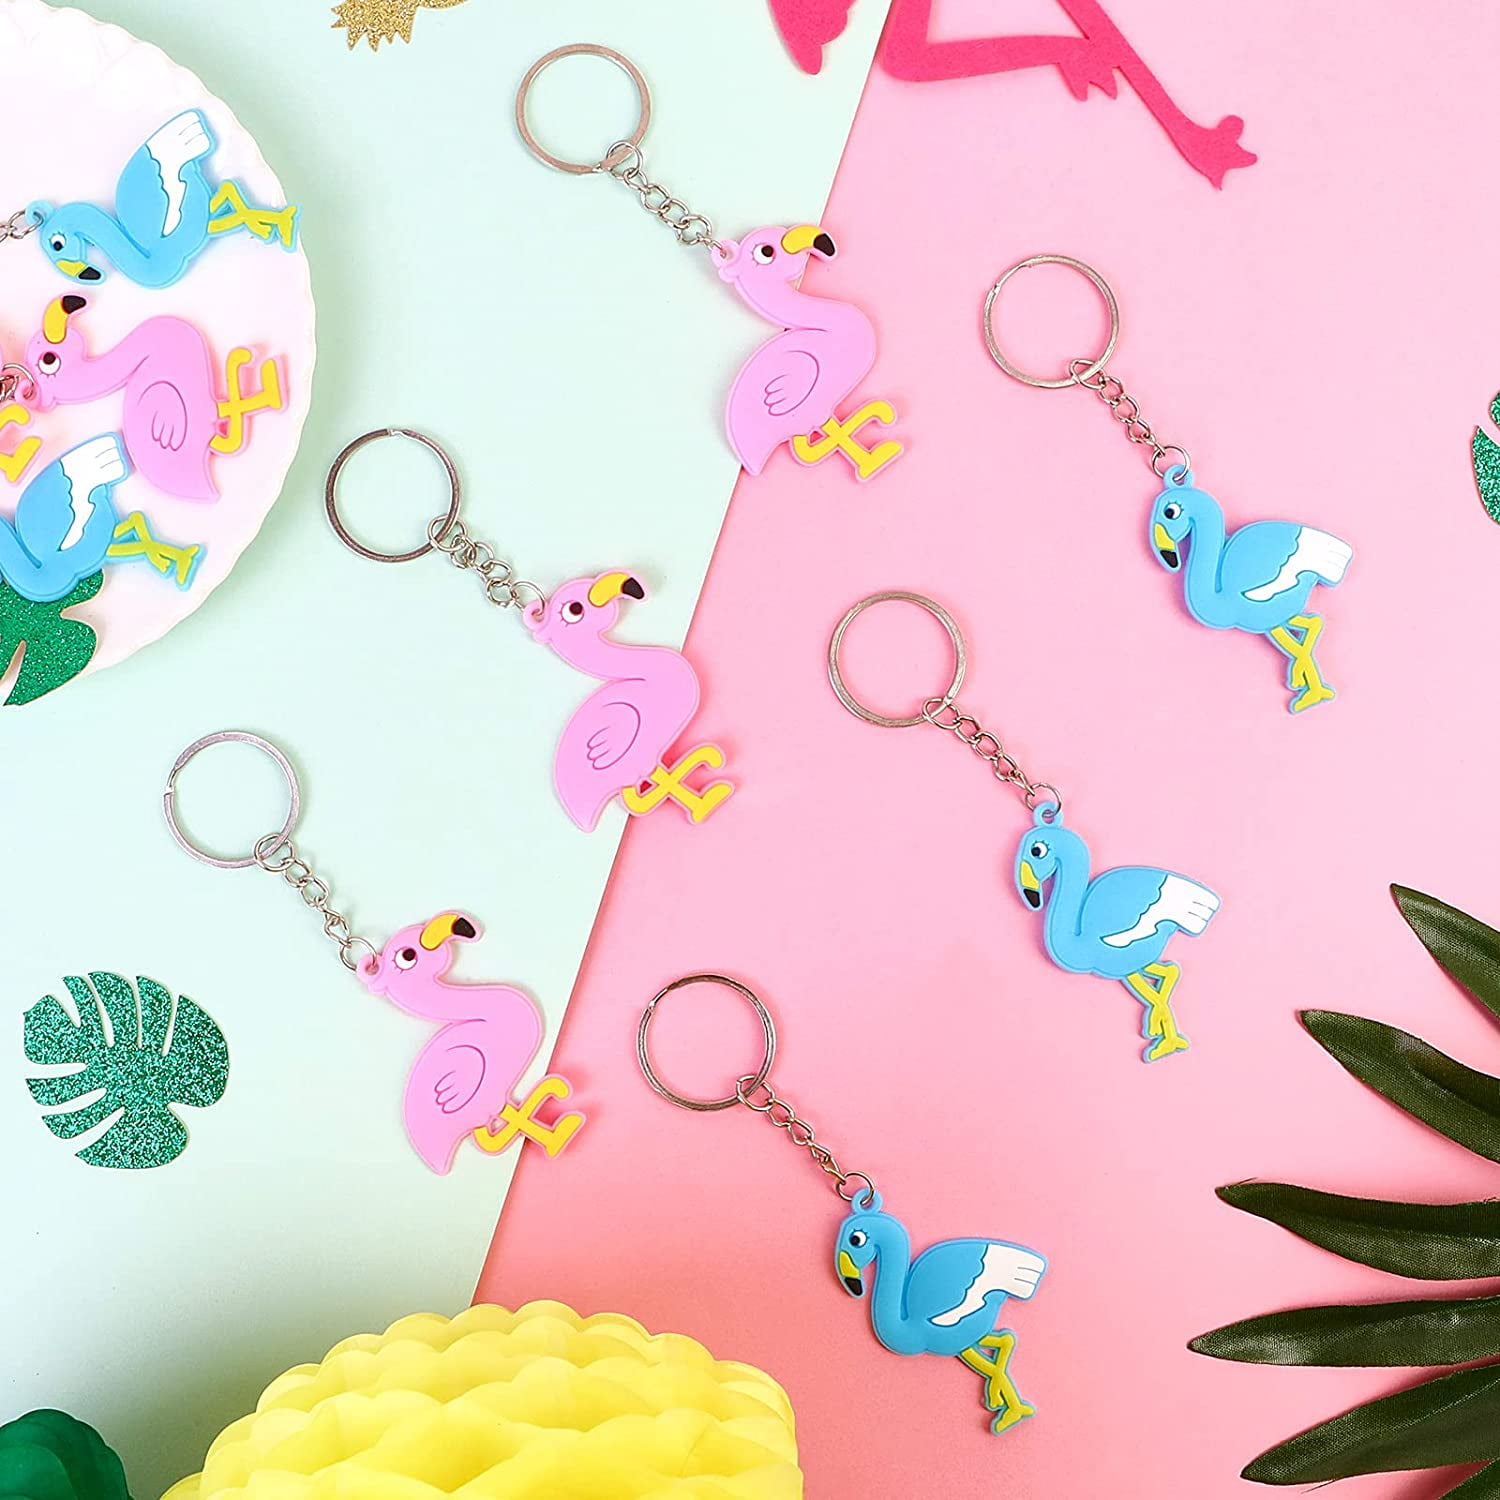 FunLlama Cute Pouch: Tropical Flamingo Cactus Storage Bag For Coins,  Jewelry, Keys & More Perfect Party Favor And Decor From Jessie06, $0.93